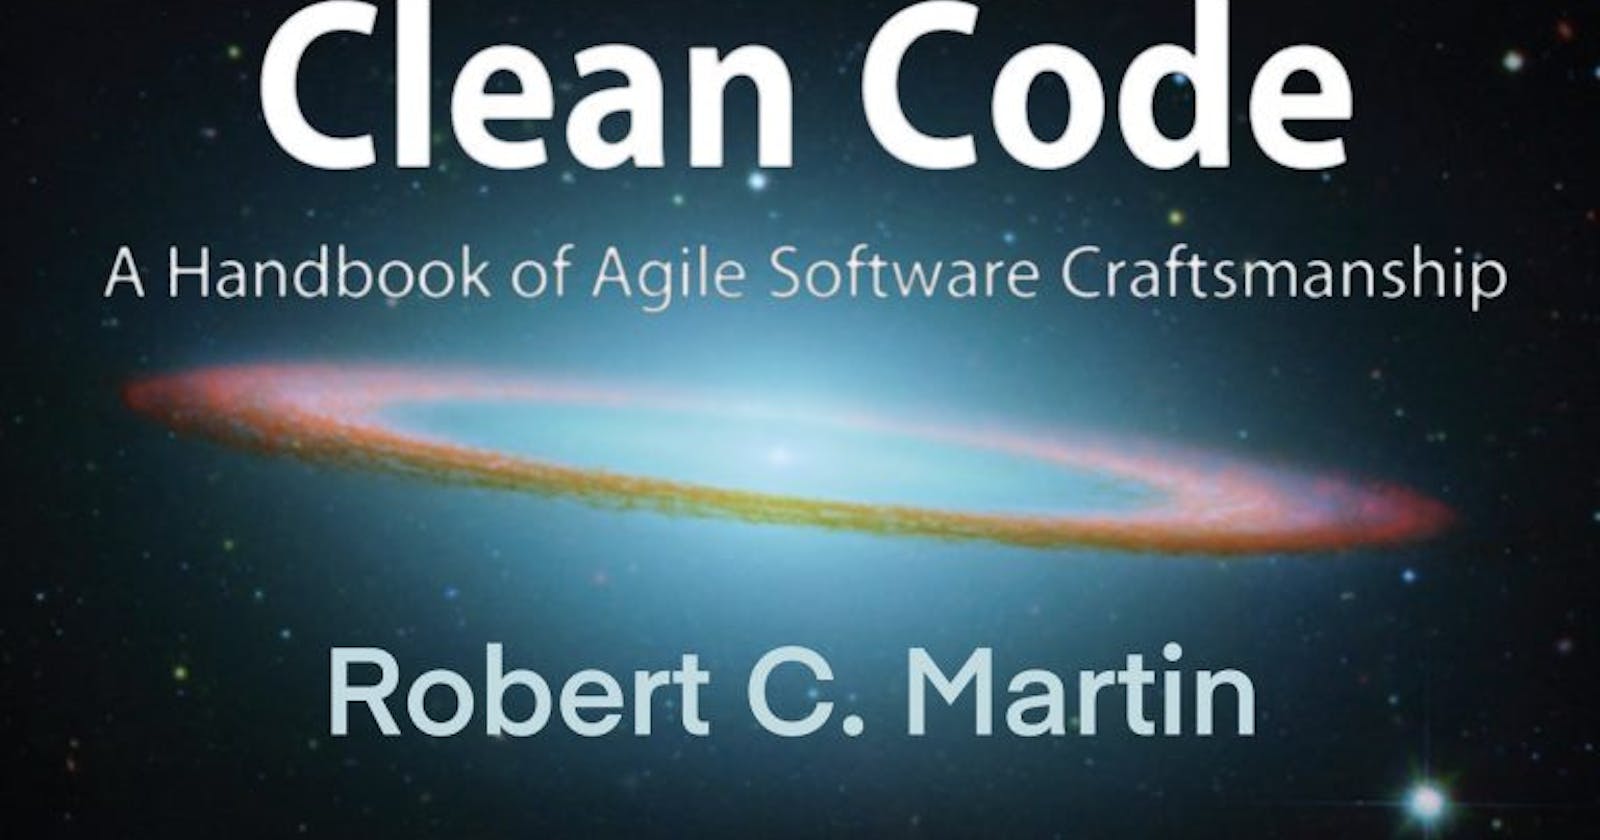 Clean Code - What does it mean, and why is it important?